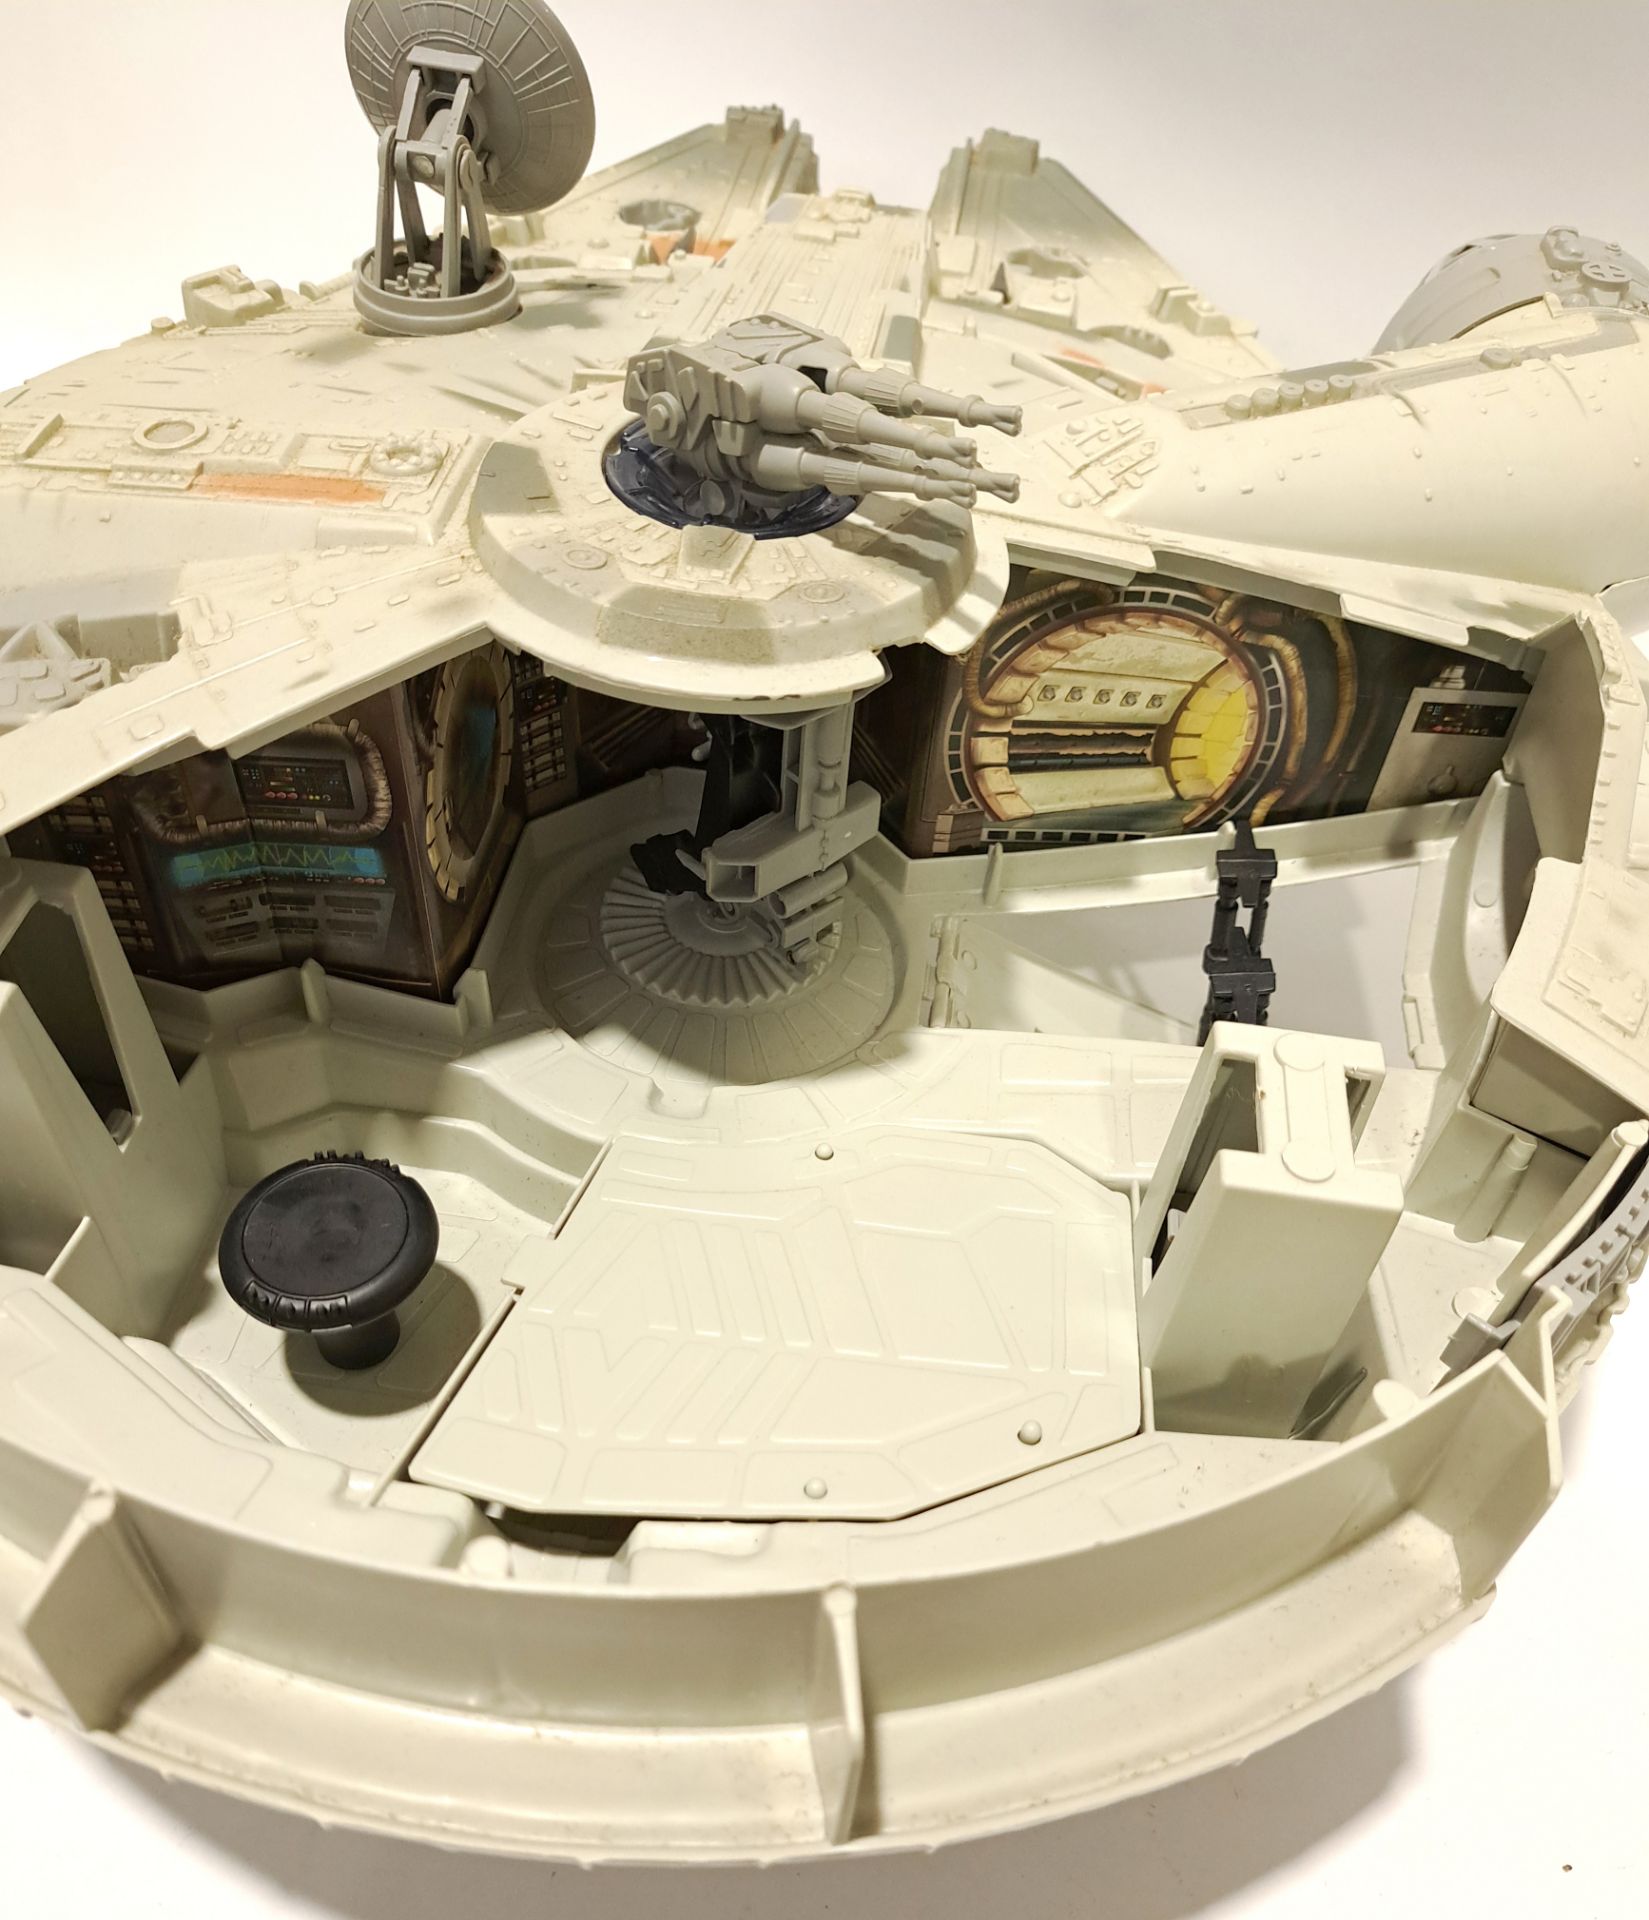 Kenner Star Wars The Power of the Force Electronic Millennium Falcon - Image 2 of 2